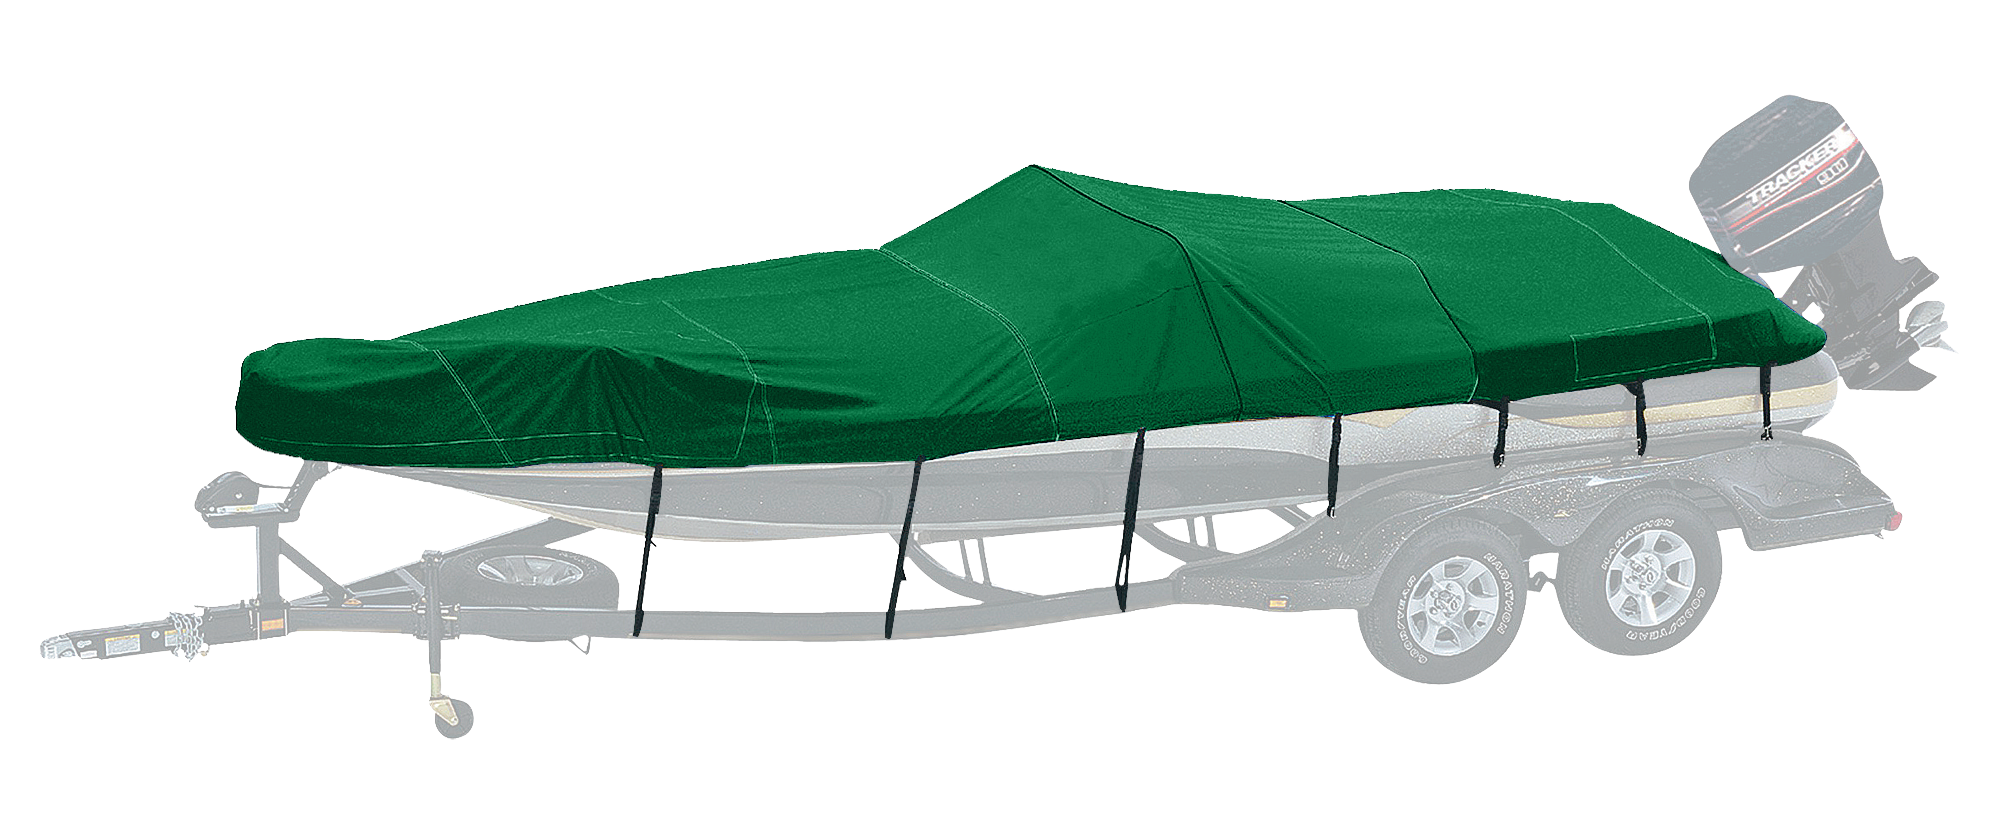 Bass Pro Shops Exact Fit Boat Cover by Westland - Tahoe Boats - 2005 228 Deckboat I/O - Forest Green